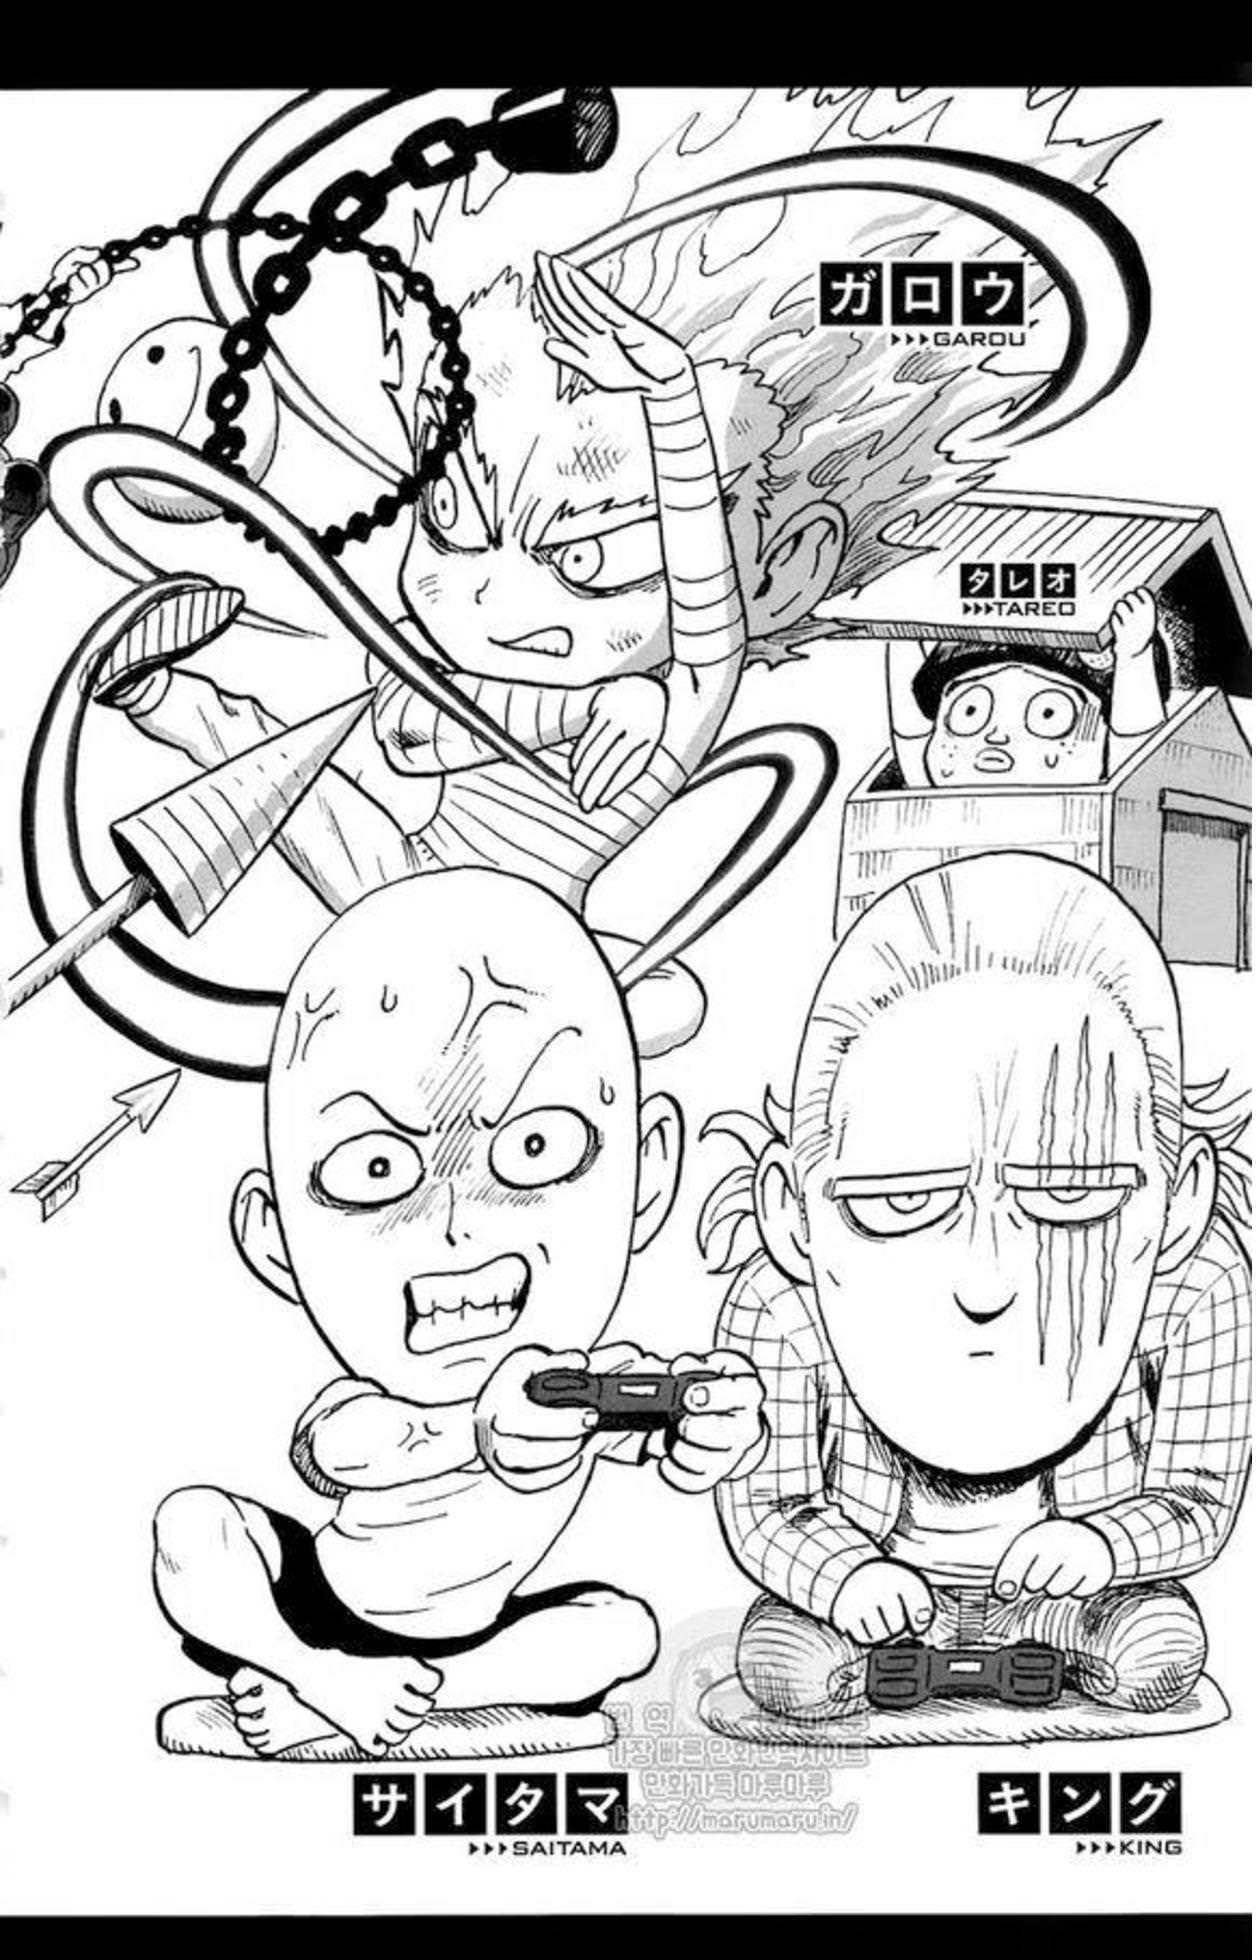 One Punch Man, Chapter 84.1 Volume 16 Extras image 06